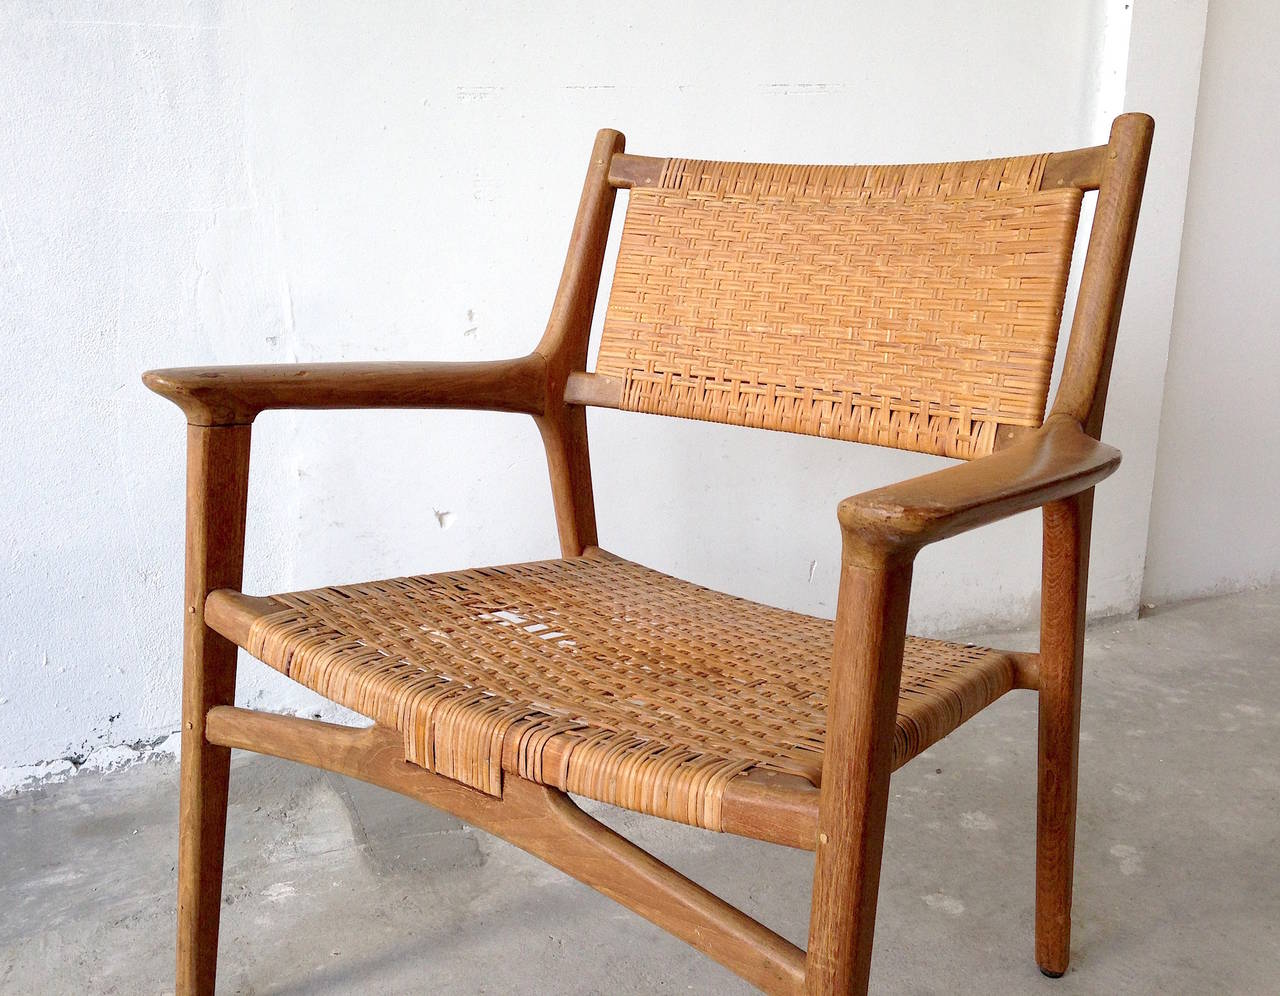 Hans J. Wegner

a fantastic lounge chair from Hans J. Wegner - made by Johannes Hansen, Copenhagen. Designed in 1951.

condition: the chair is in fair conditions. The frame is strong, cane has defects and the wood needs some love... for